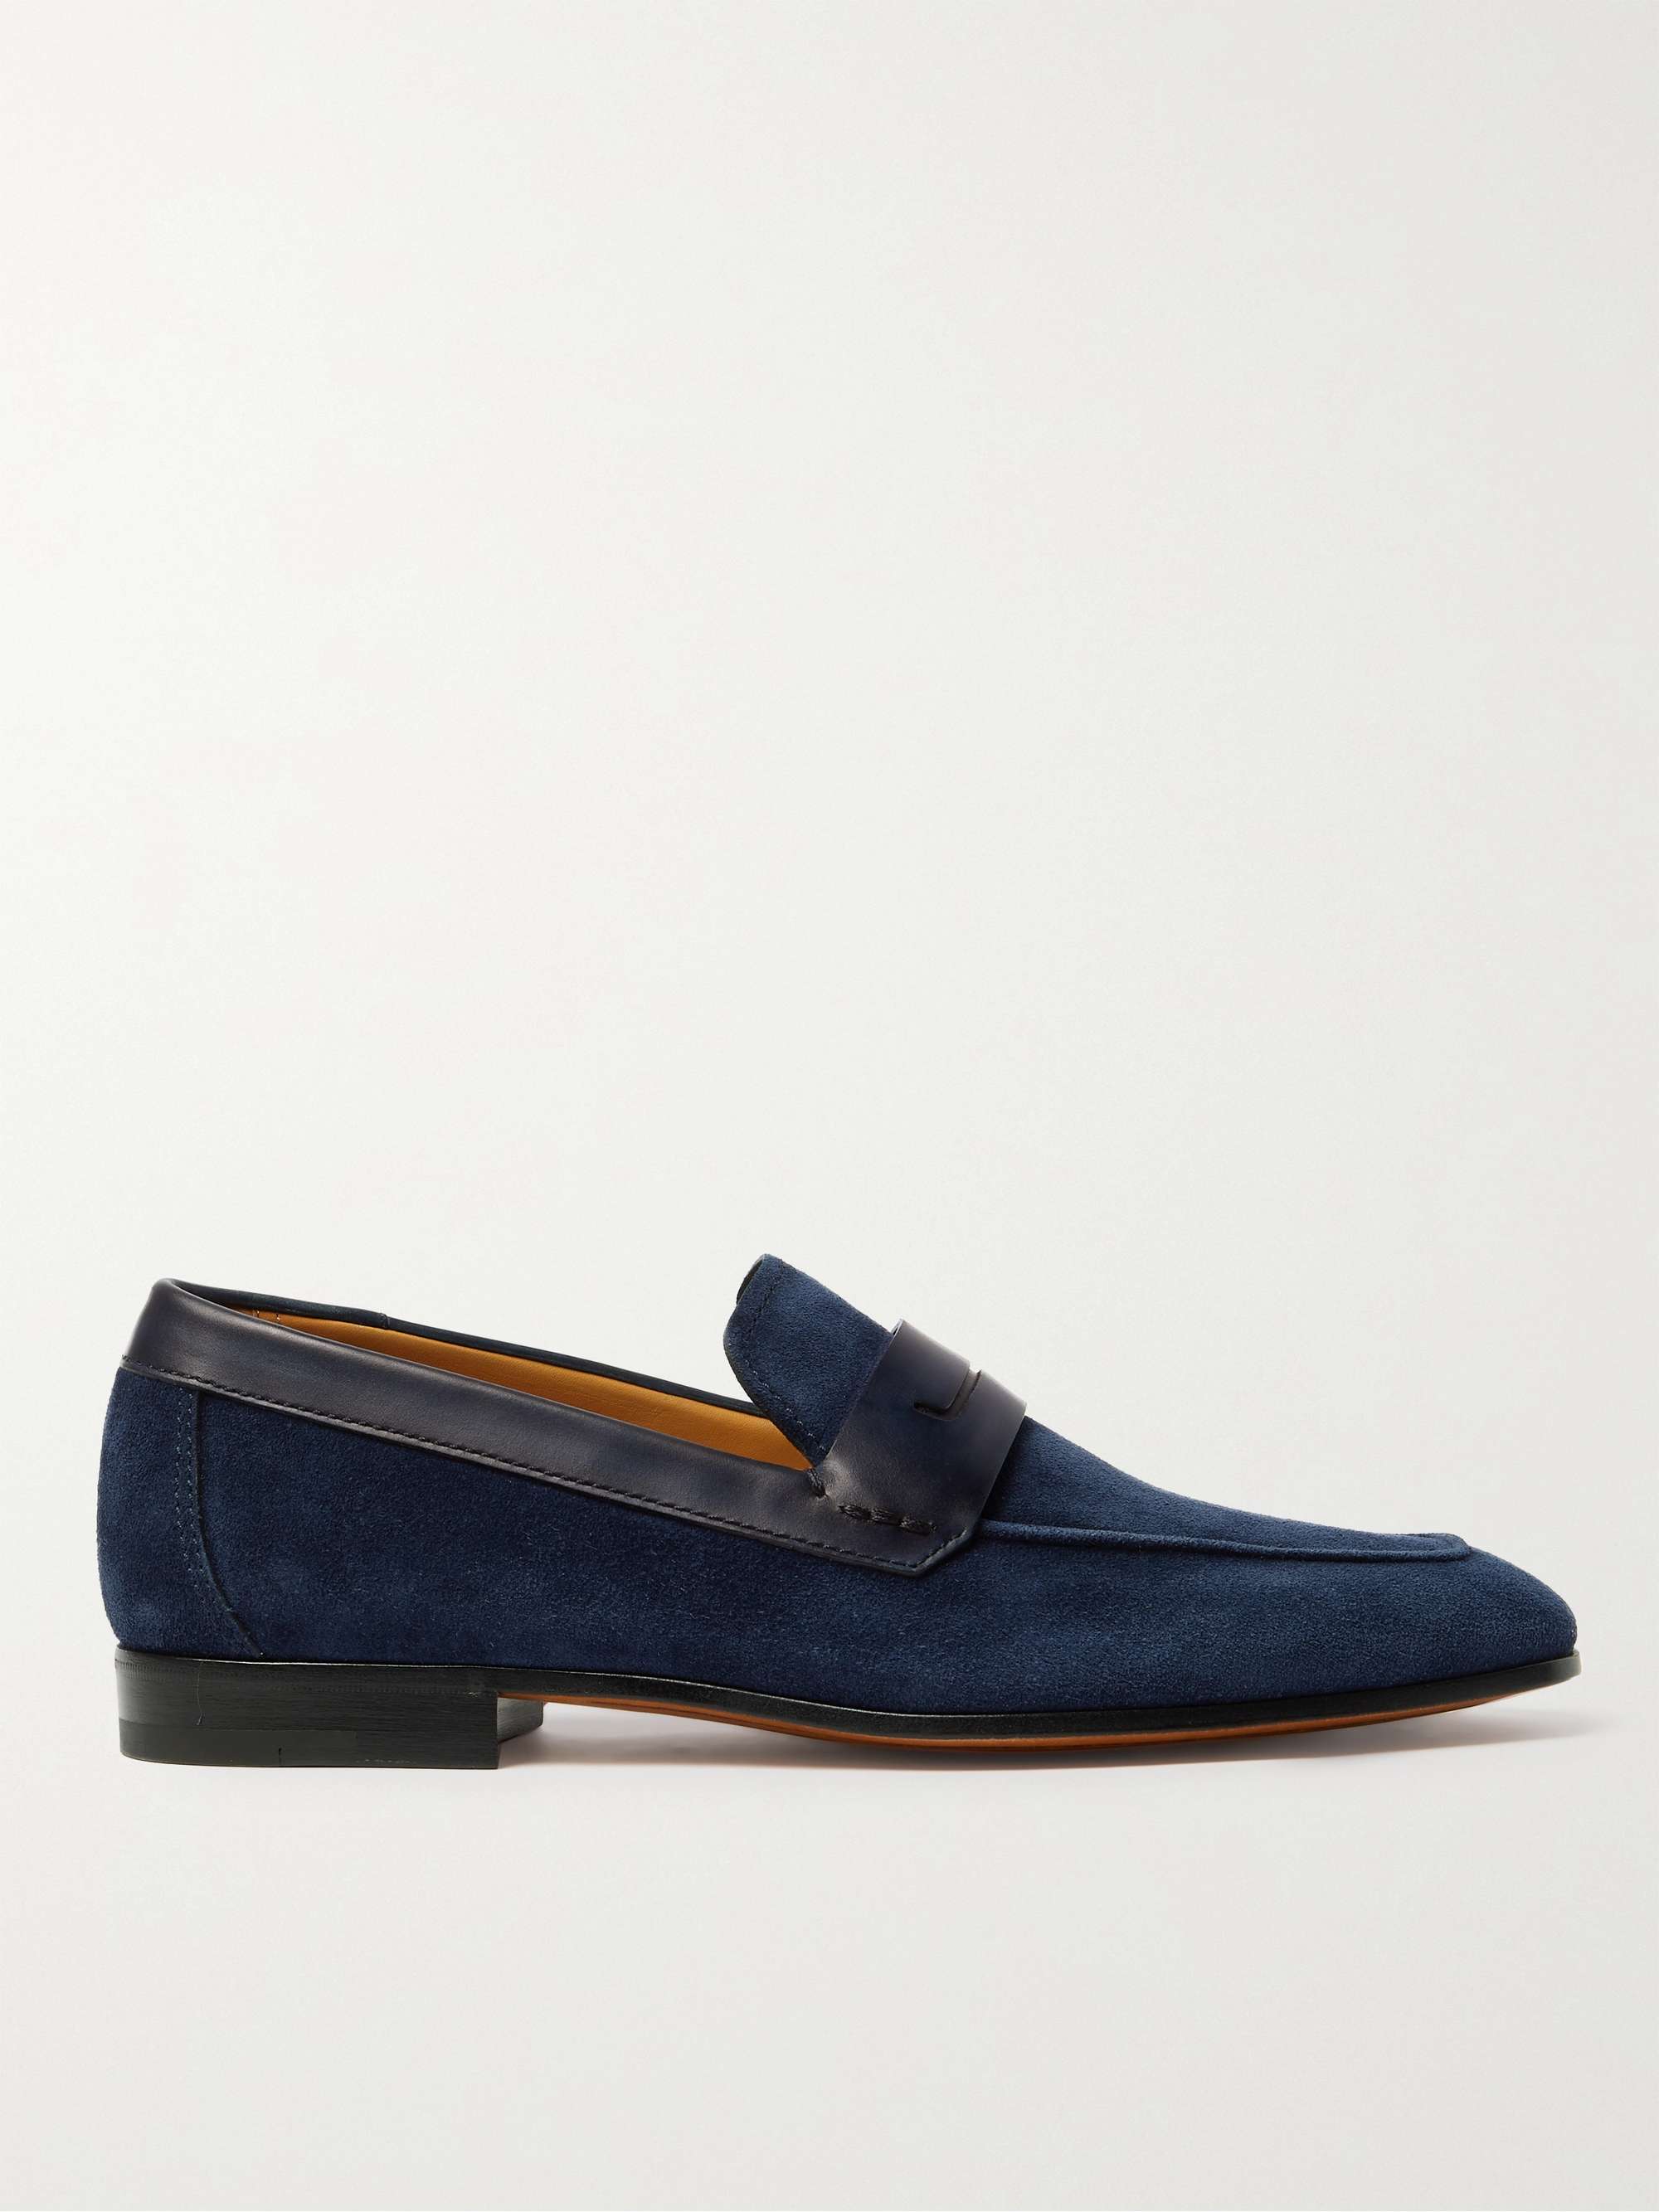 BERLUTI Lorenzo Leather-Trimmed Suede Loafers for Men | MR PORTER